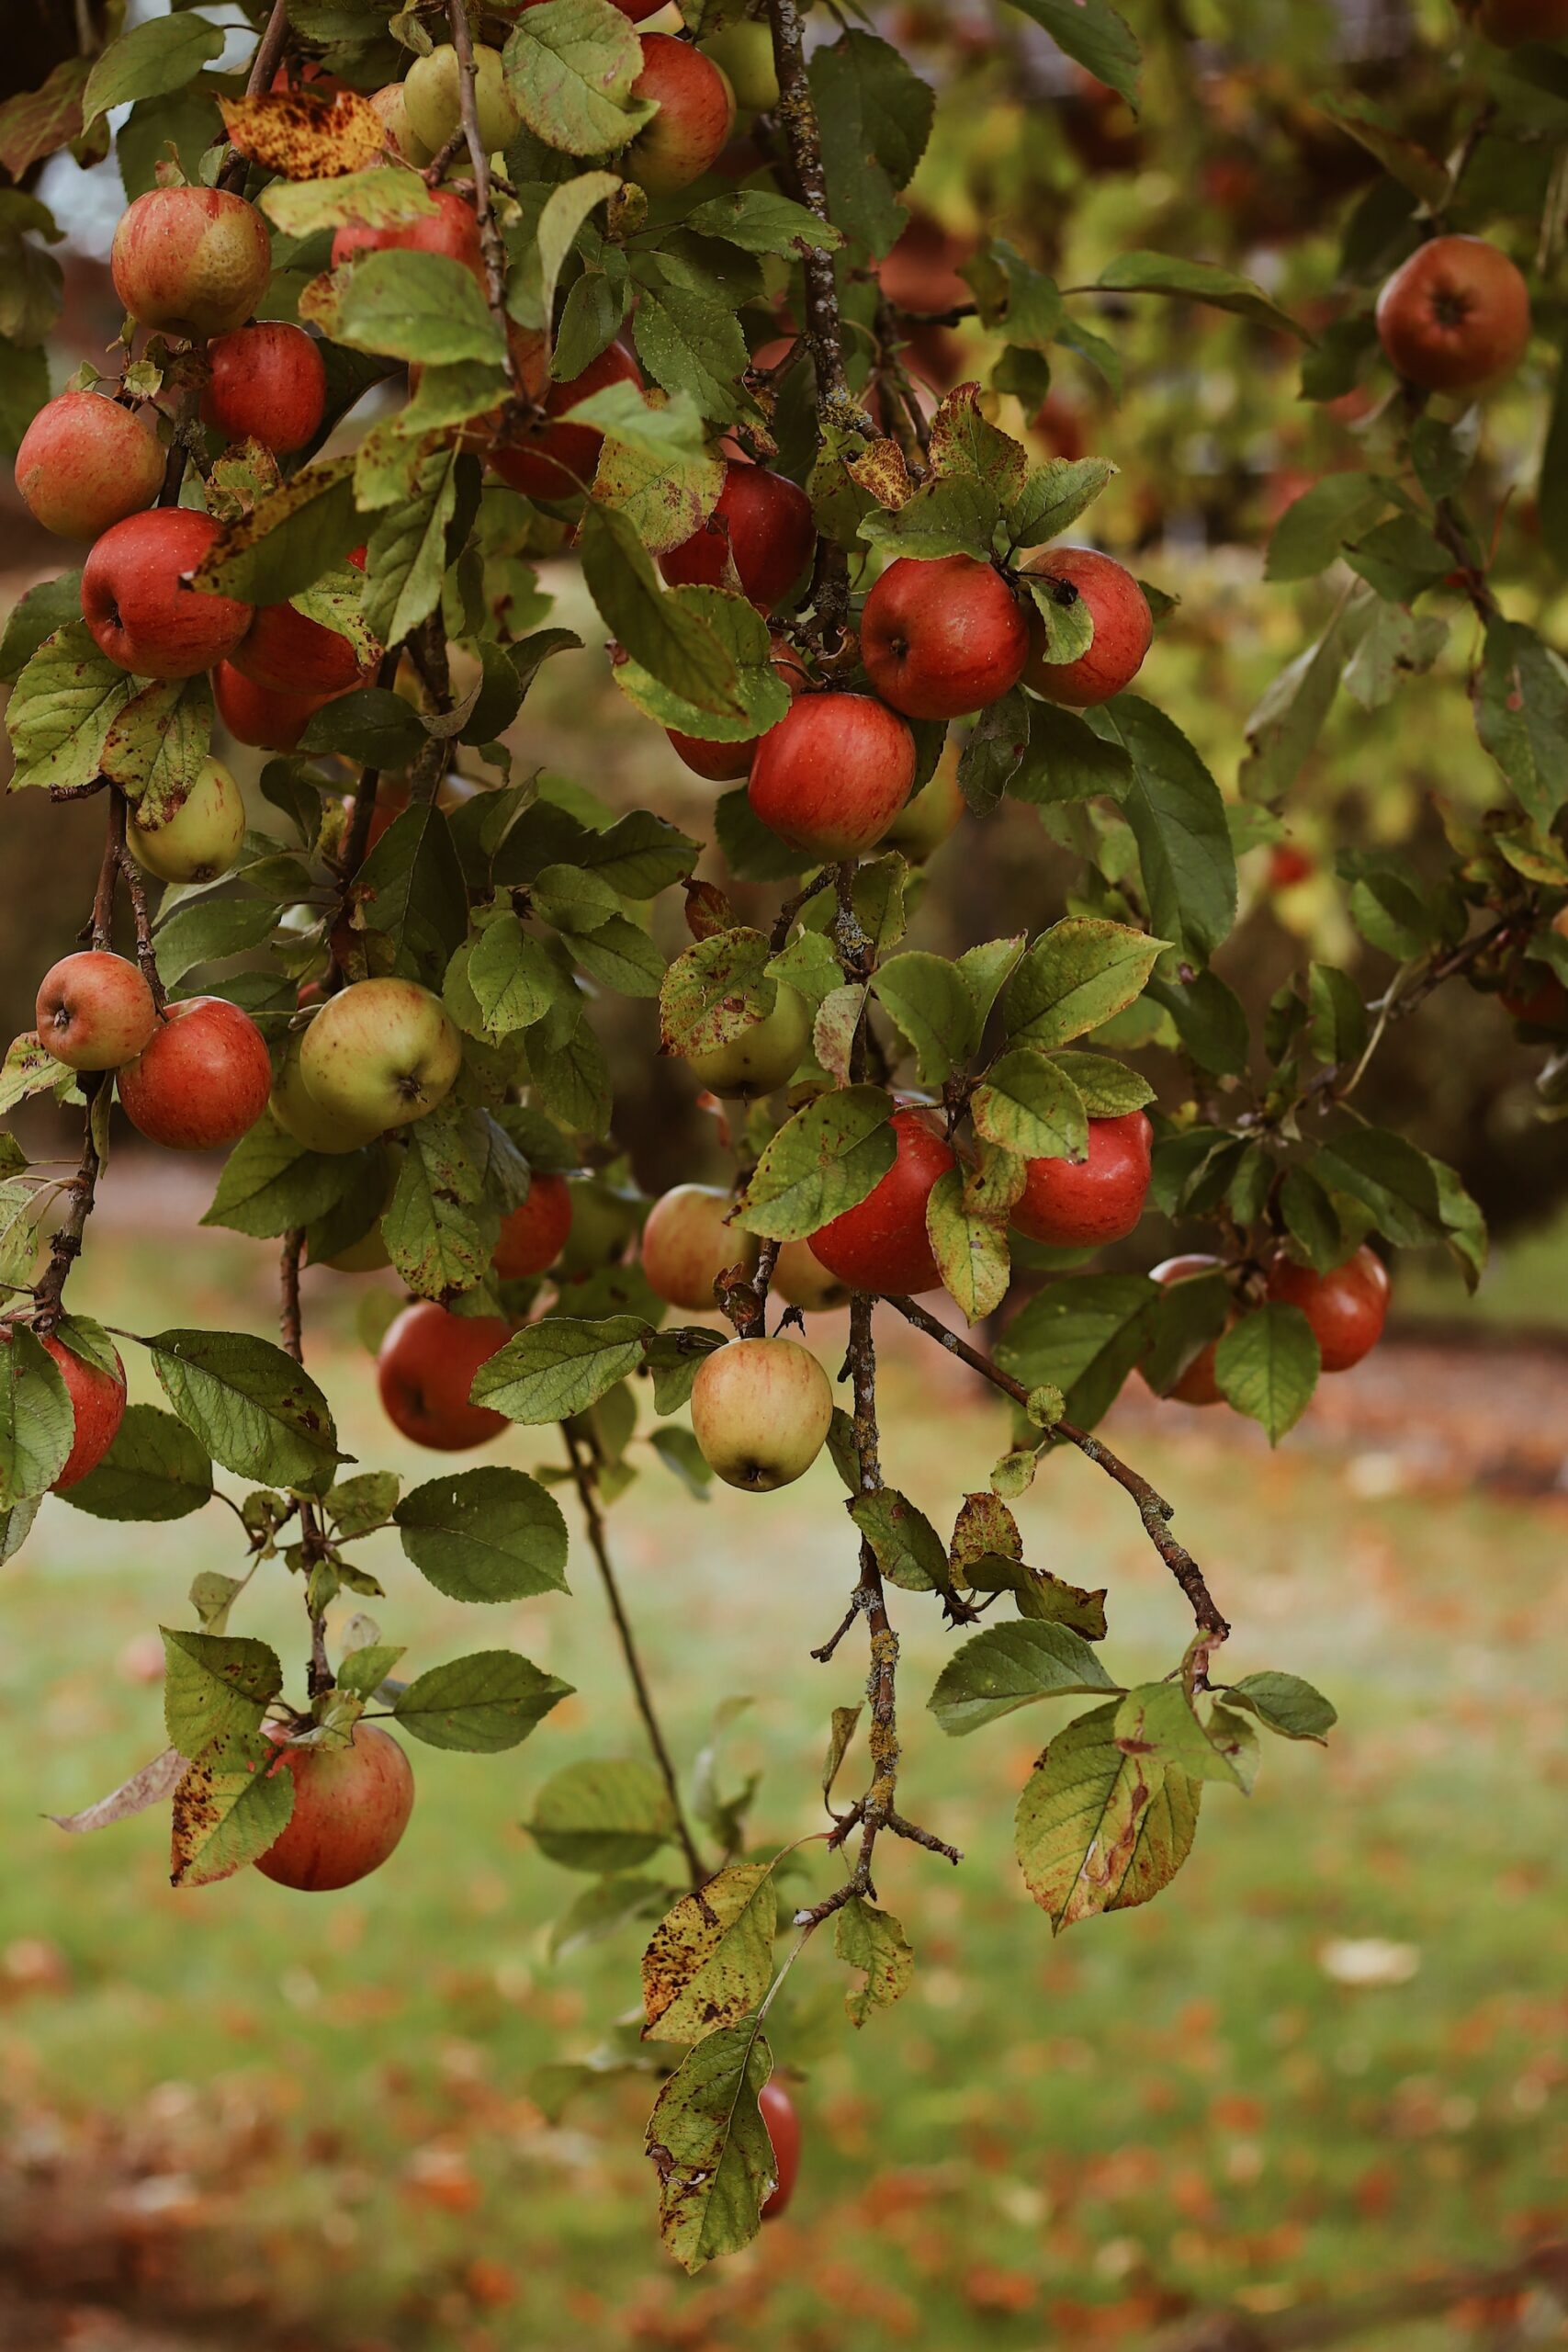 From Tree to Table - Apple Picking